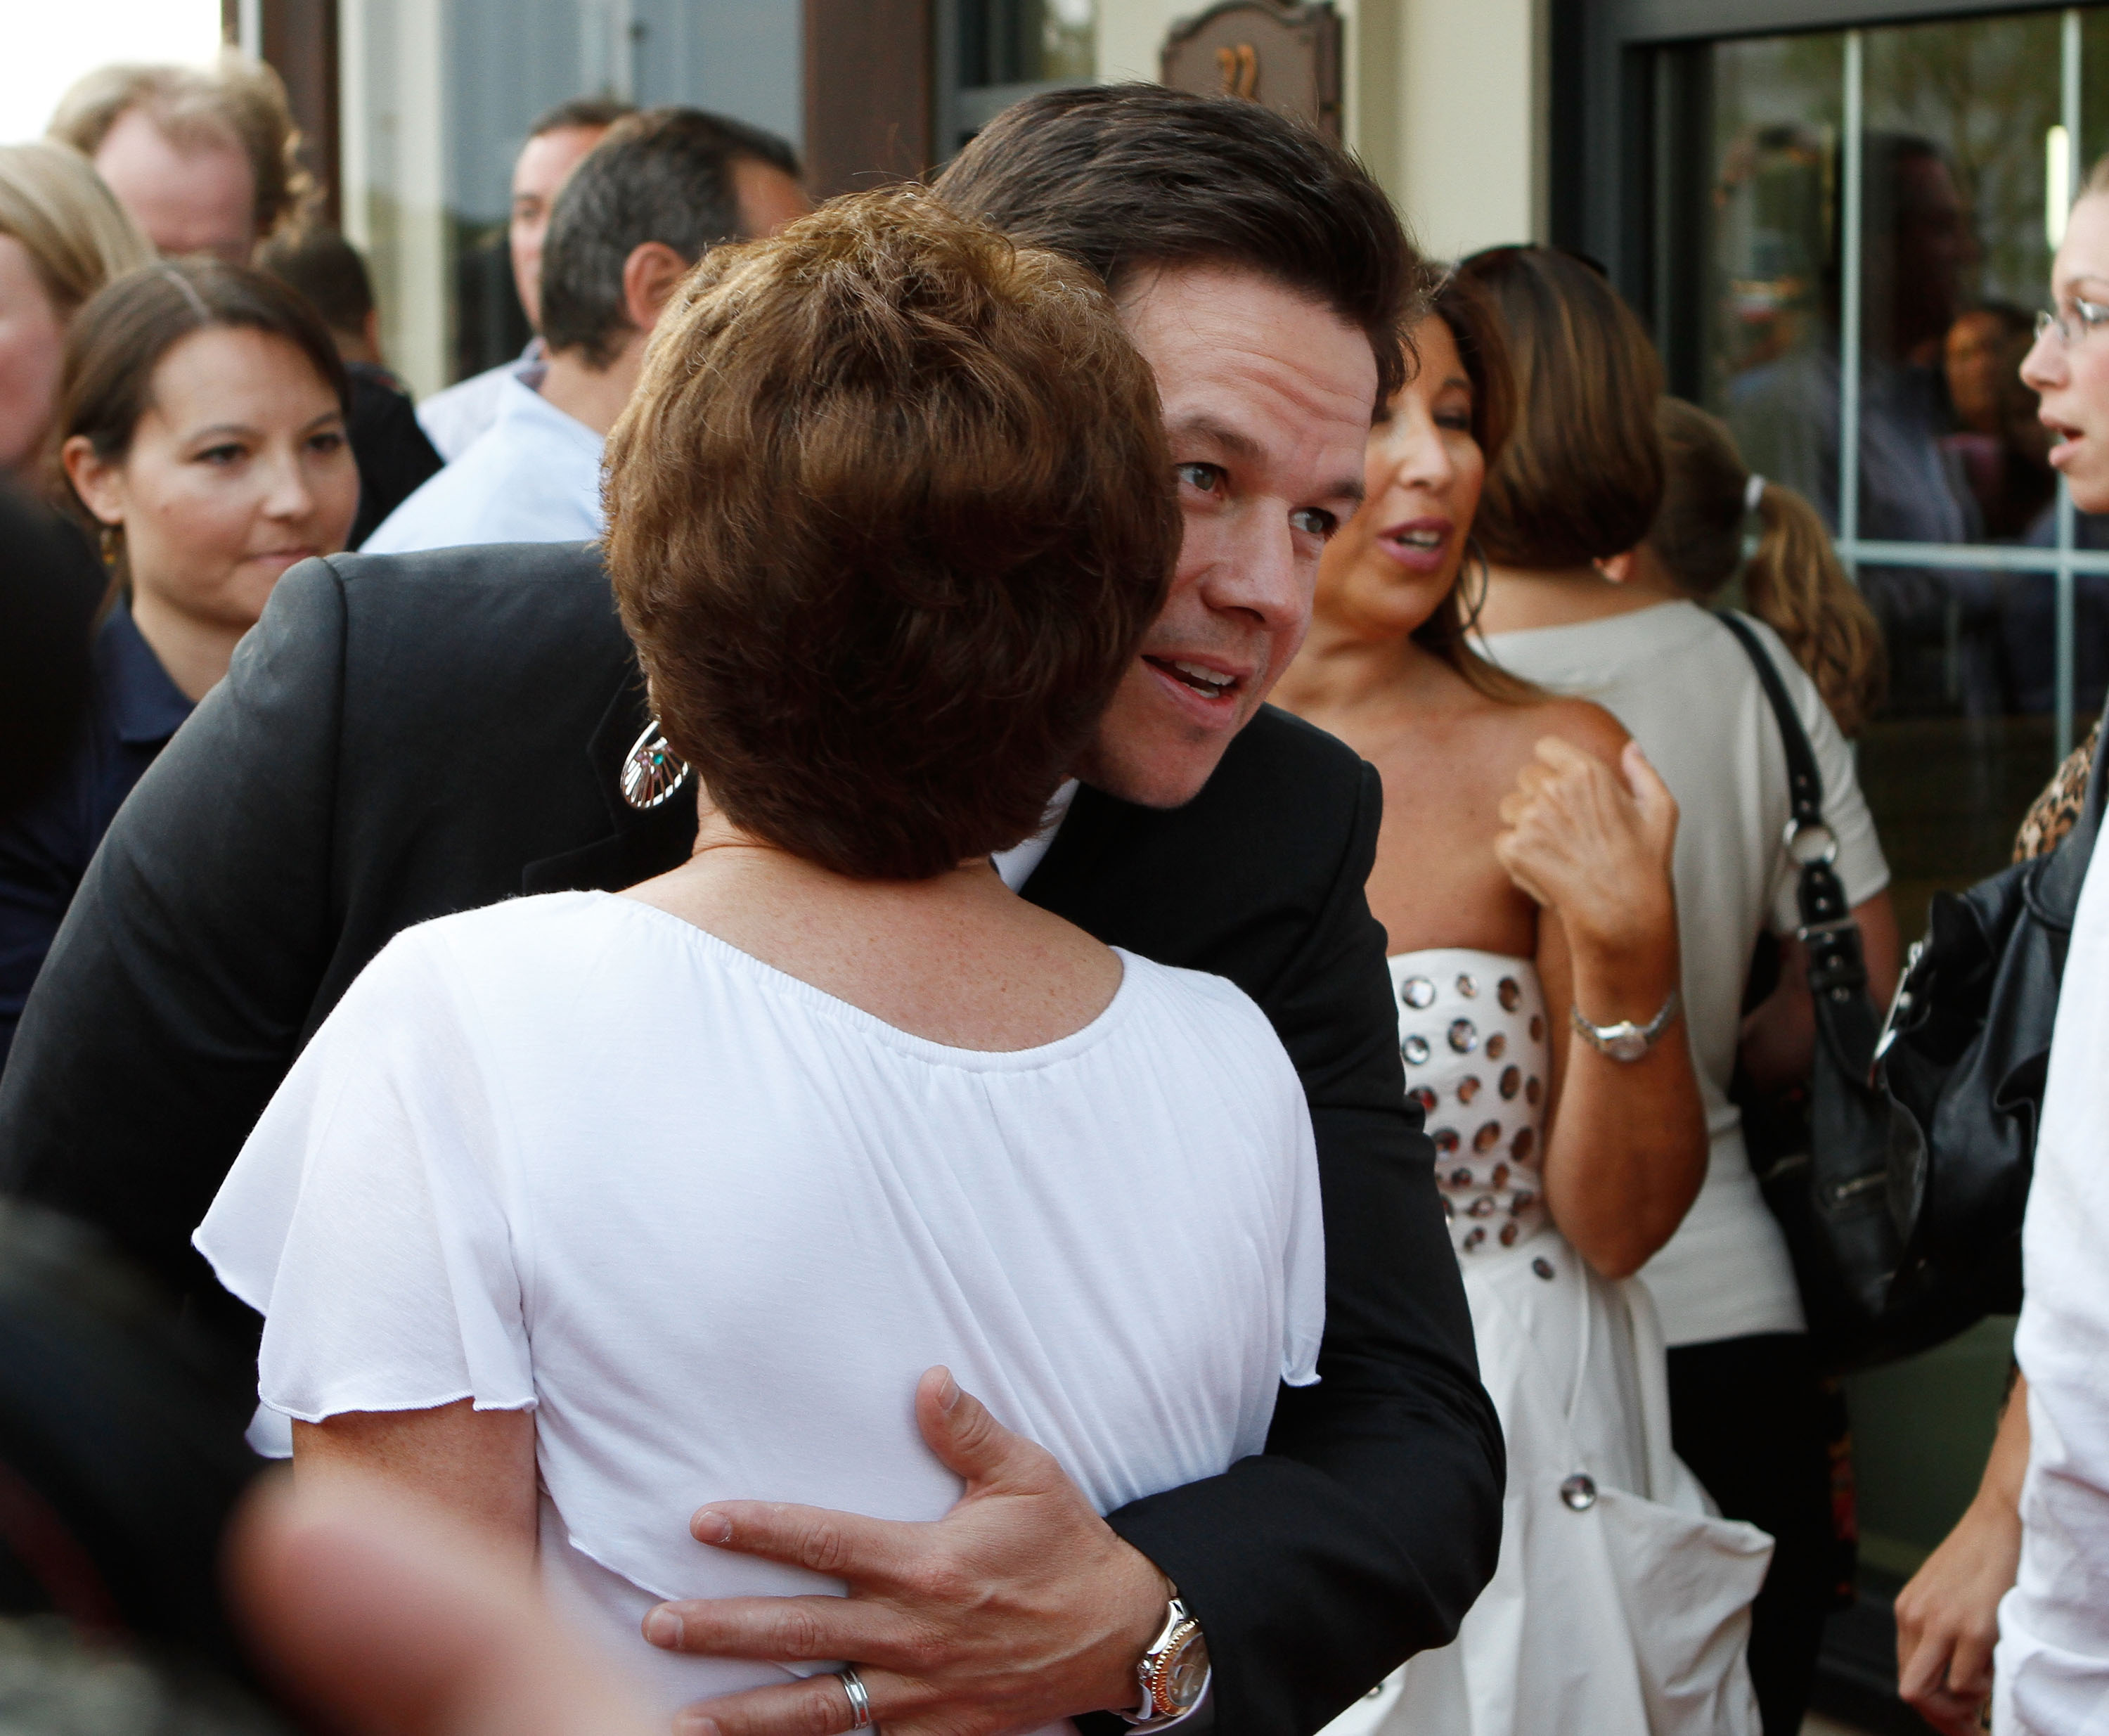 Mark Wahlberg and Alma Wahlberg attend a screening of "The Other Guys" in Hingham, Massachusetts on August 3, 2010 | Source: Getty Images